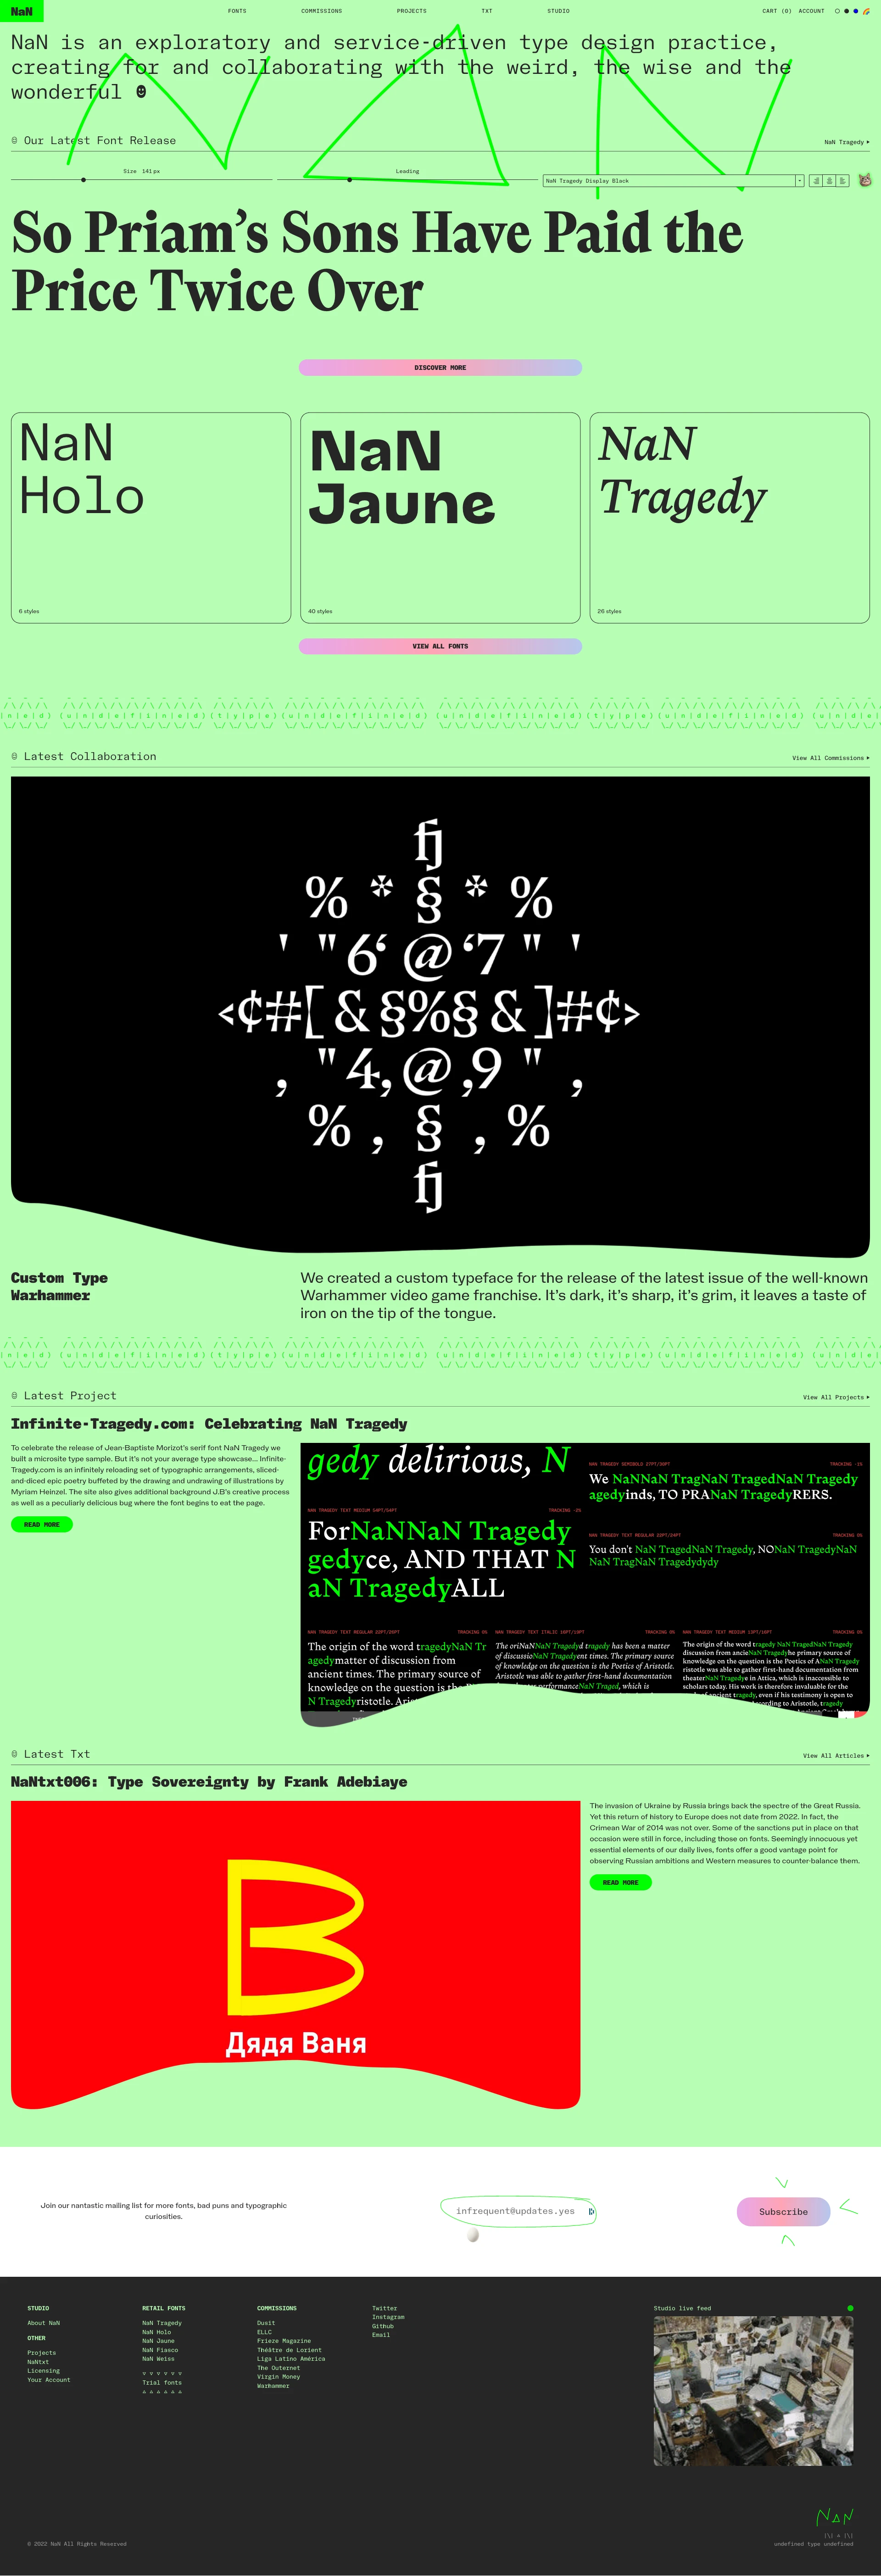 NaN Landing Page Example: NaN is an exploratory and service-driven type design practice, creating for and collaborating with the weird, the wise and the wonderful.